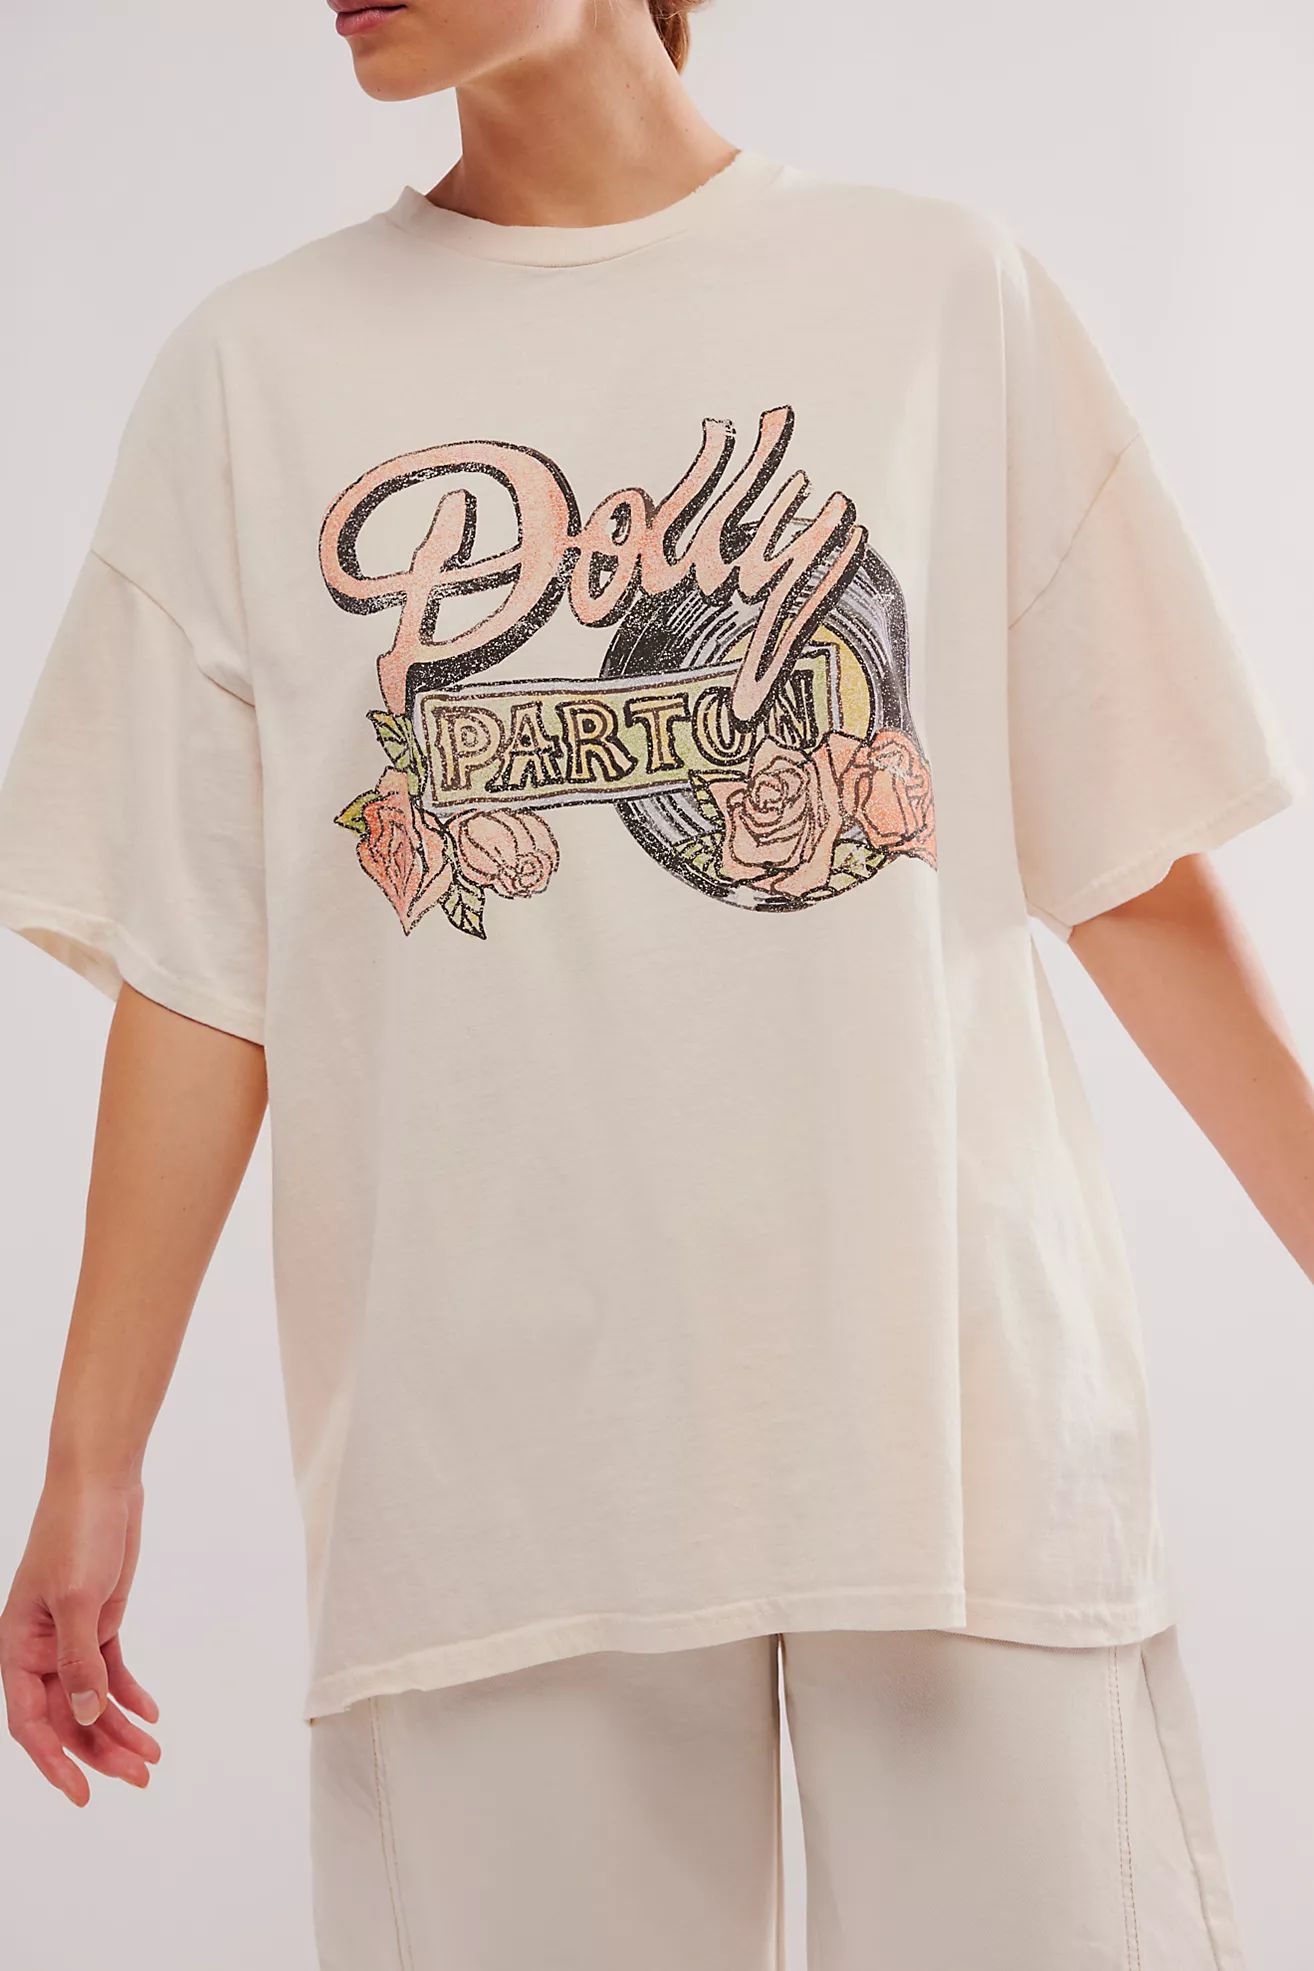 Dolly Parton Tee | Free People (Global - UK&FR Excluded)